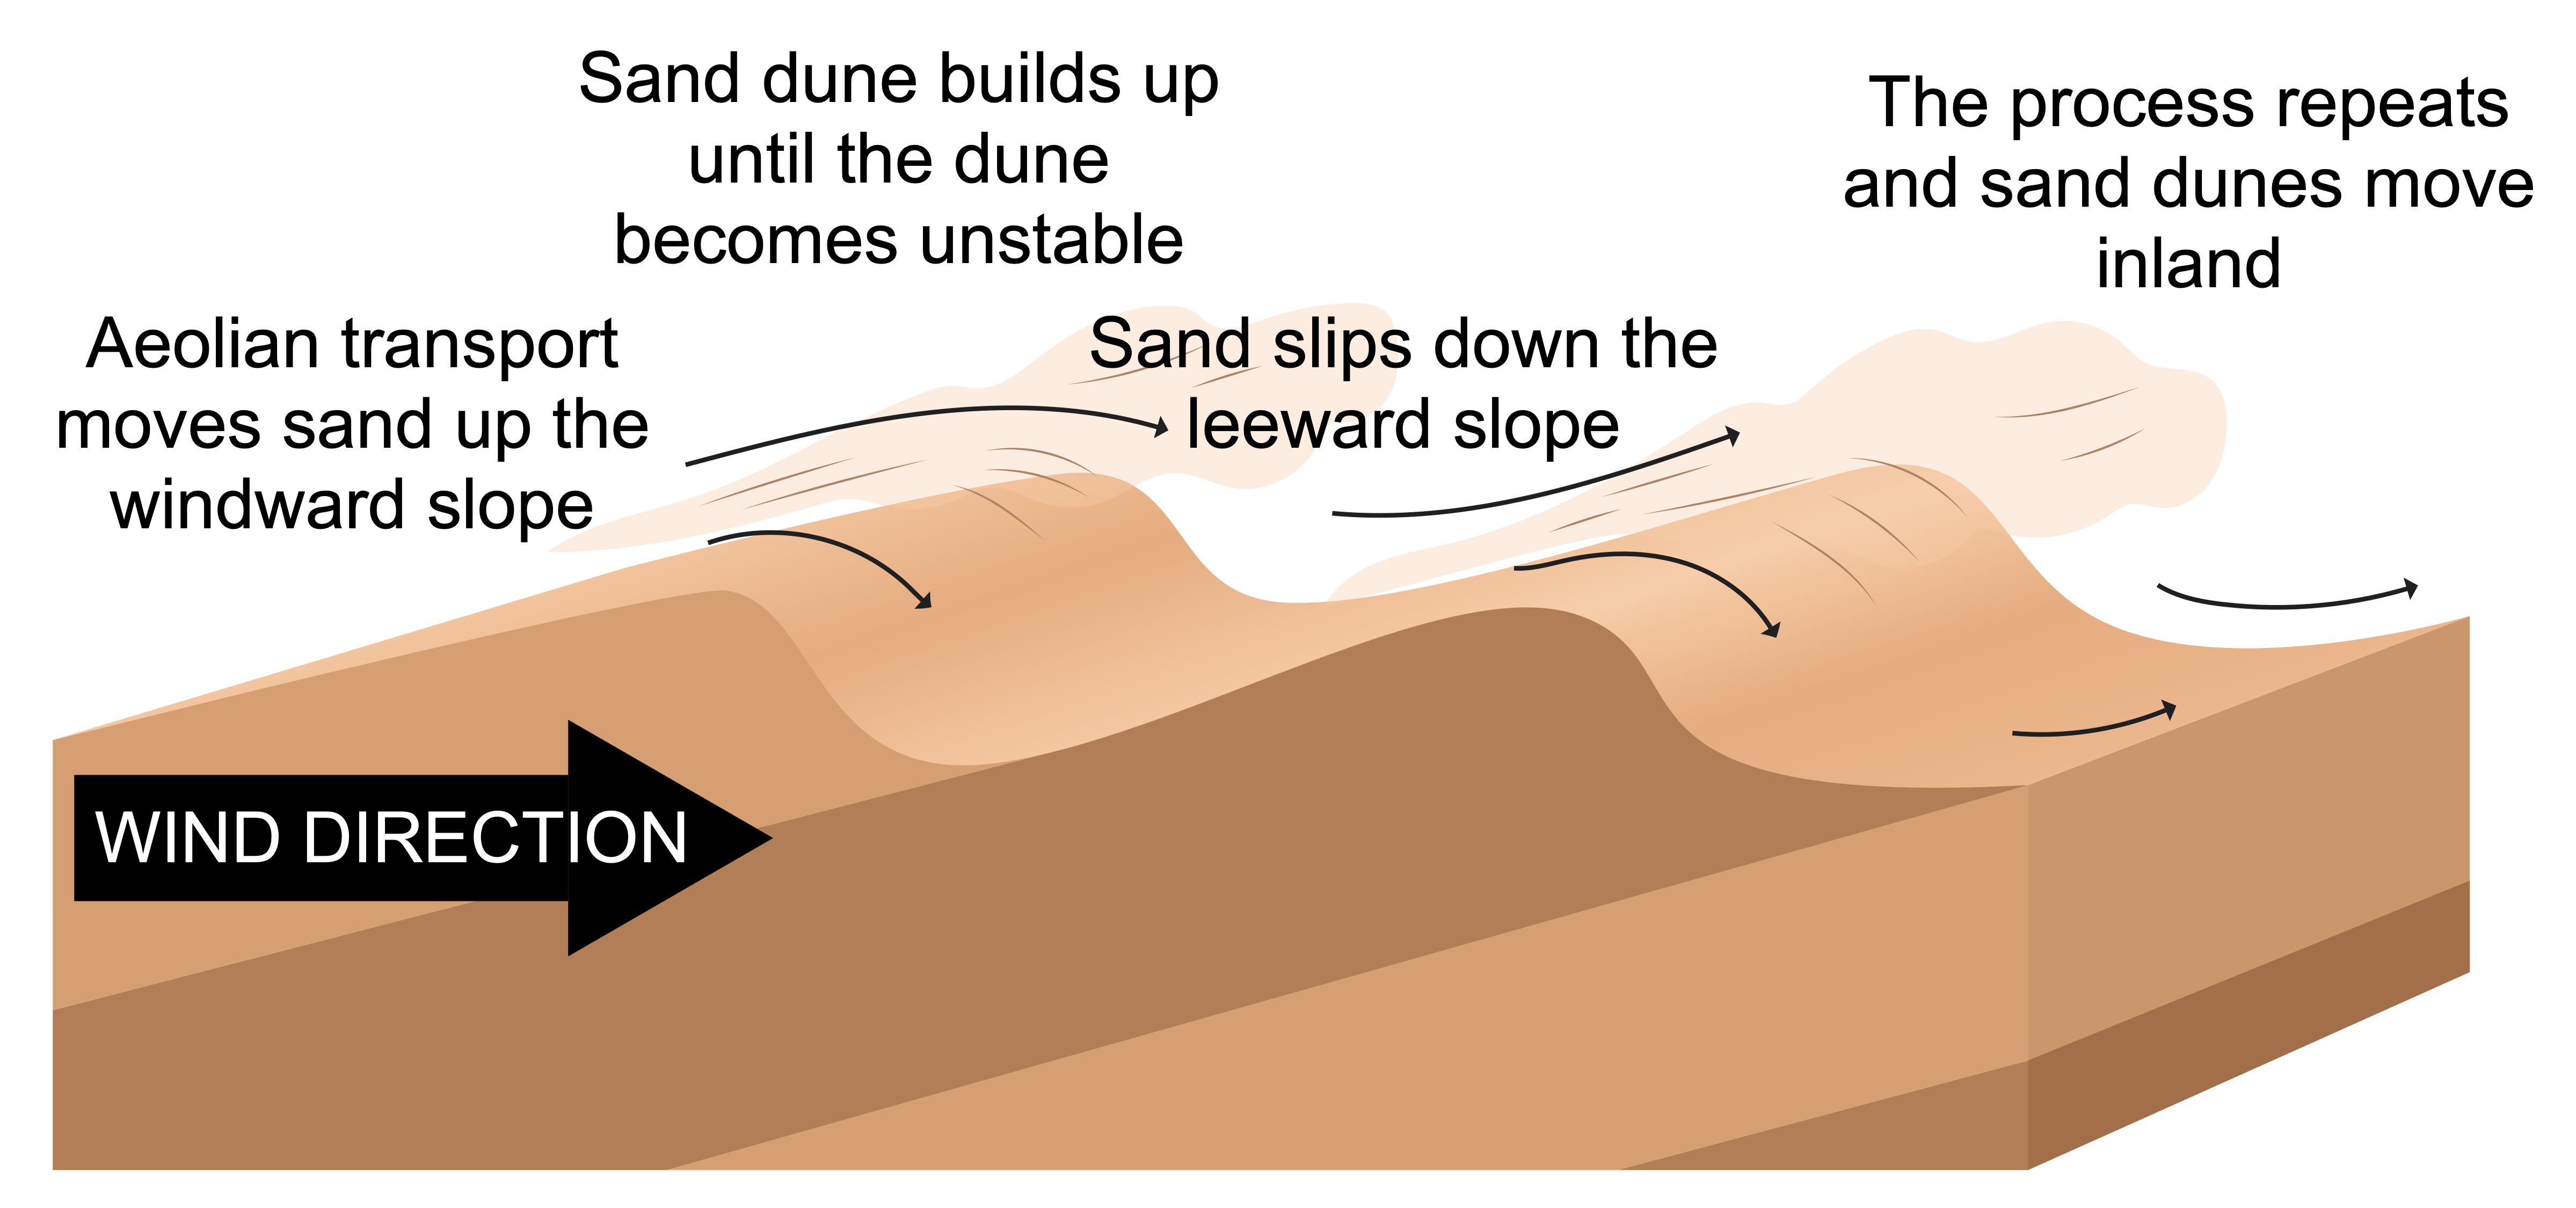 How are sand dunes formed?